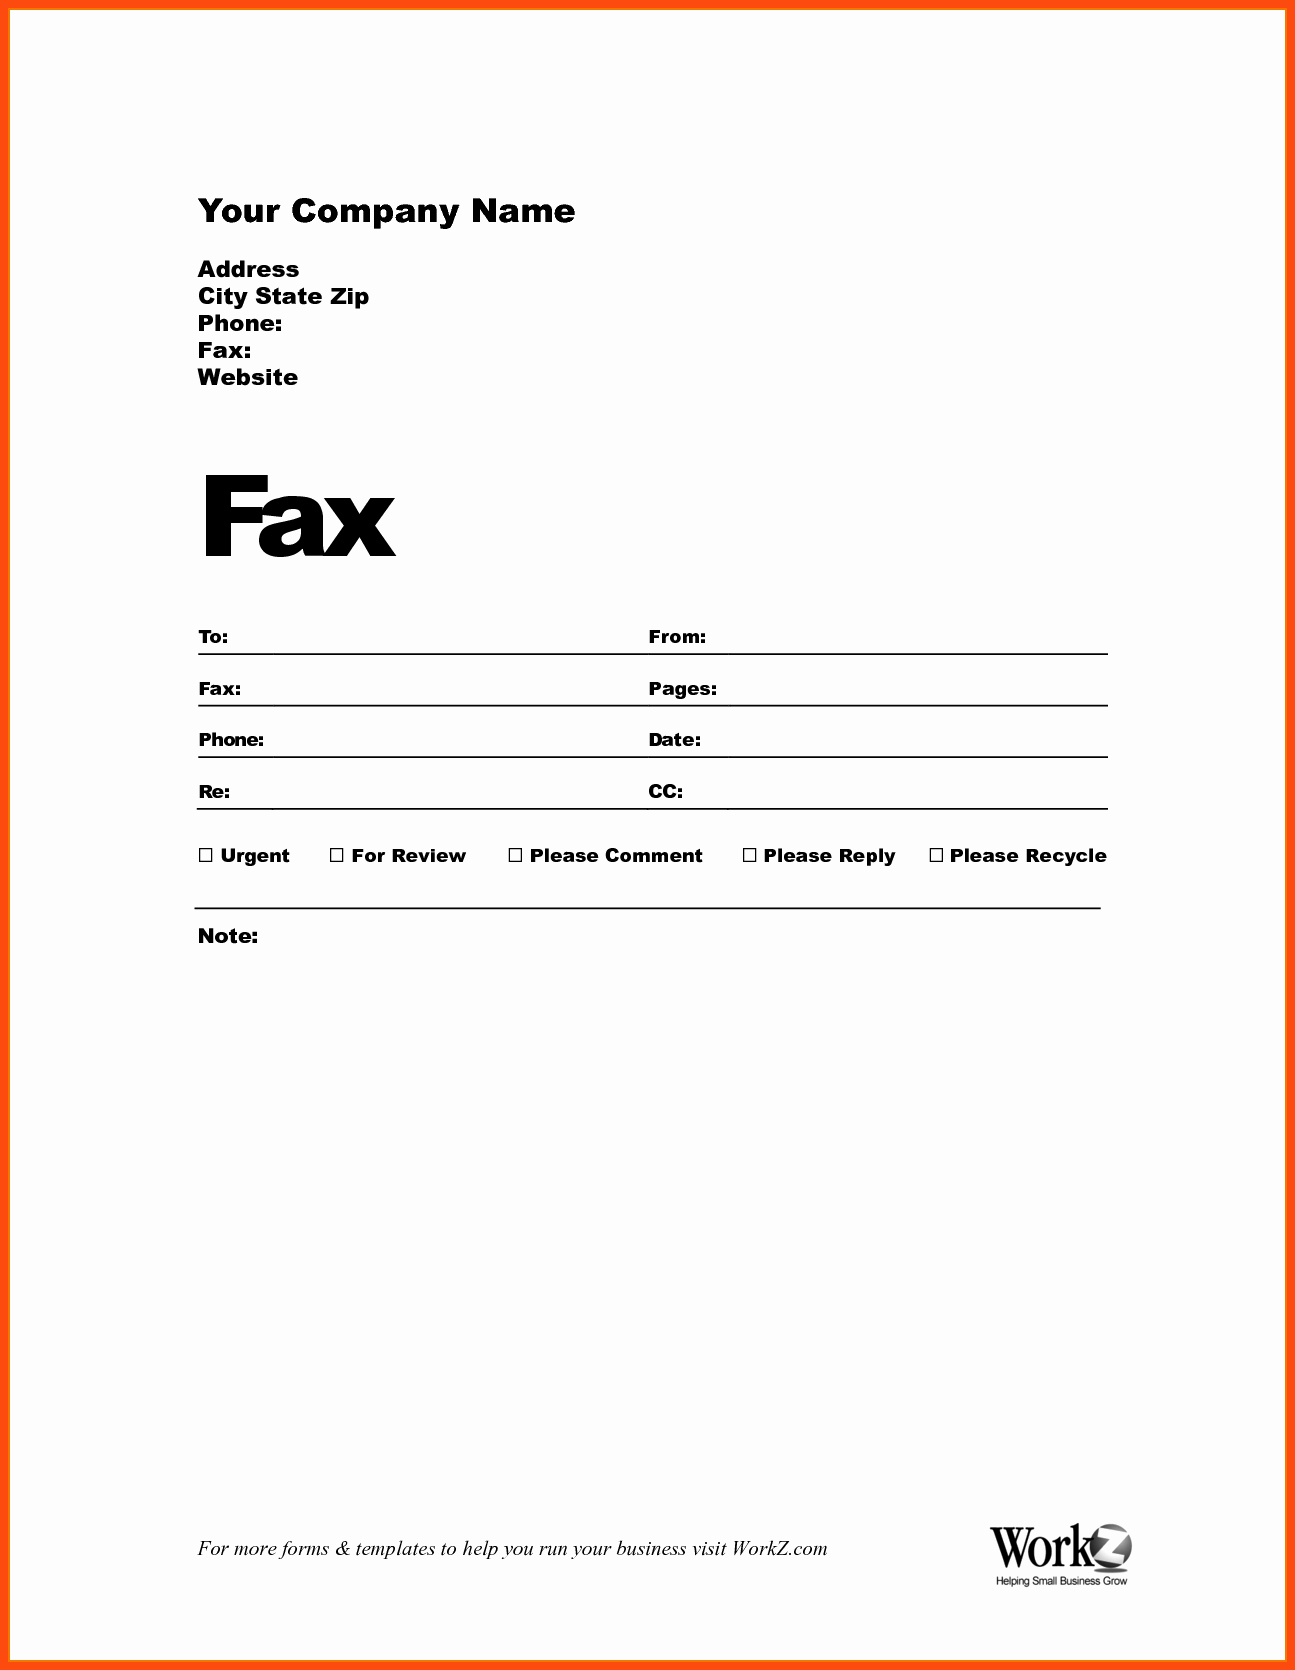 Fax Cover Page Template Best Of How to Fill Out A Fax Cover Sheet